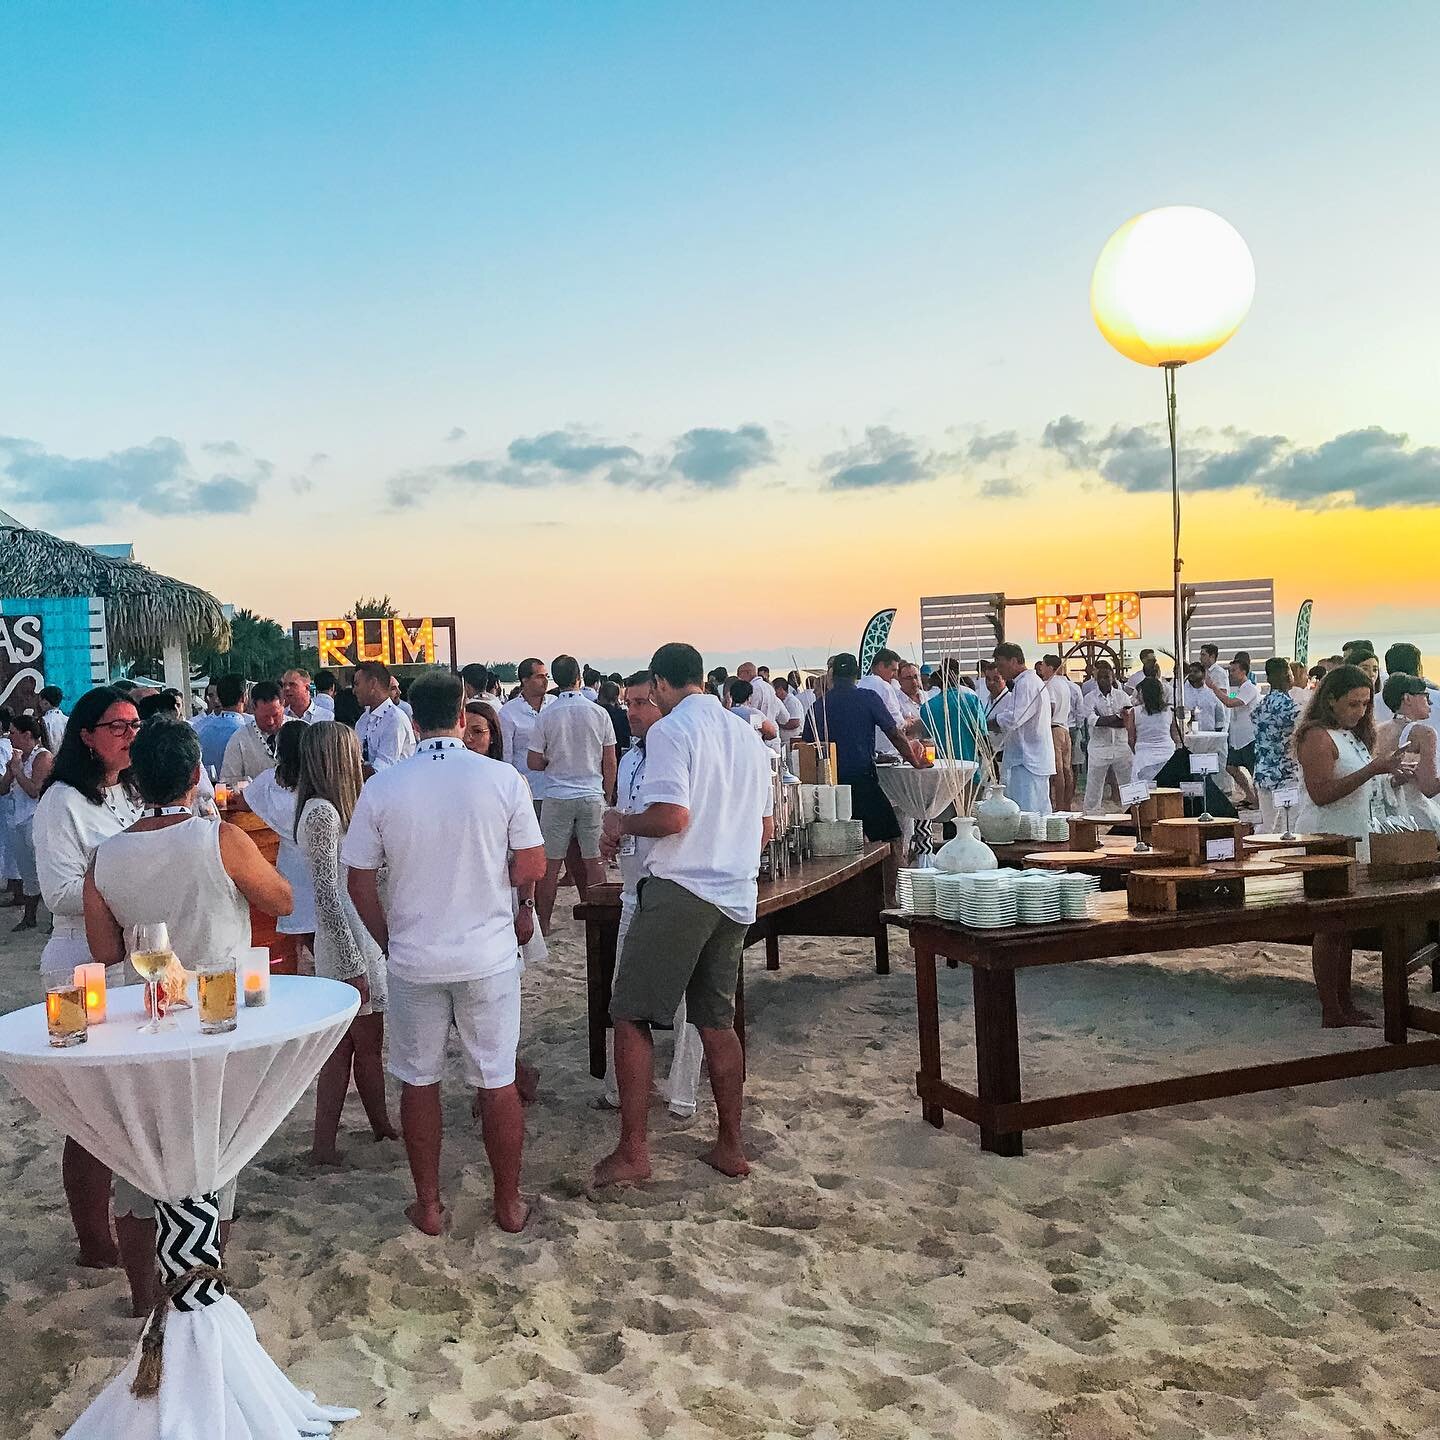 🏖Throwback to a 2019 corporate event at @ritzcarltongrandcayman . I do miss a good beach event and this venue was perfection!
⠀
Have you attended an event in these last few months?
⠀
If so, what made you feel safe?